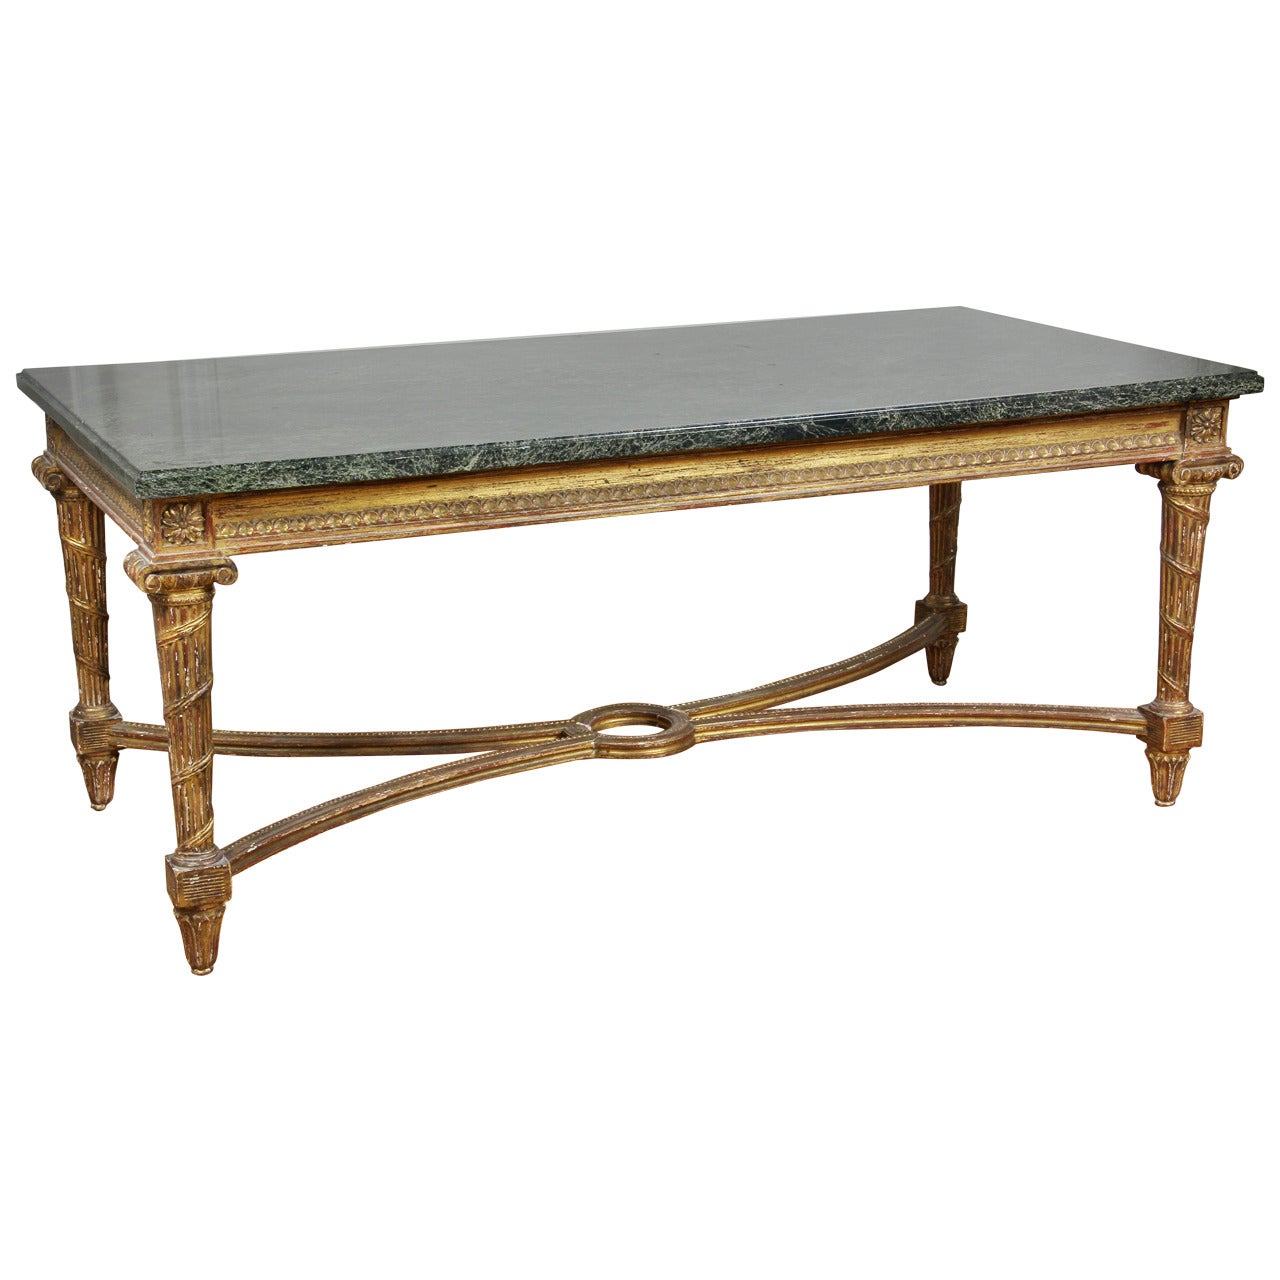 French Neoclassical Style Giltwood Coffee Table